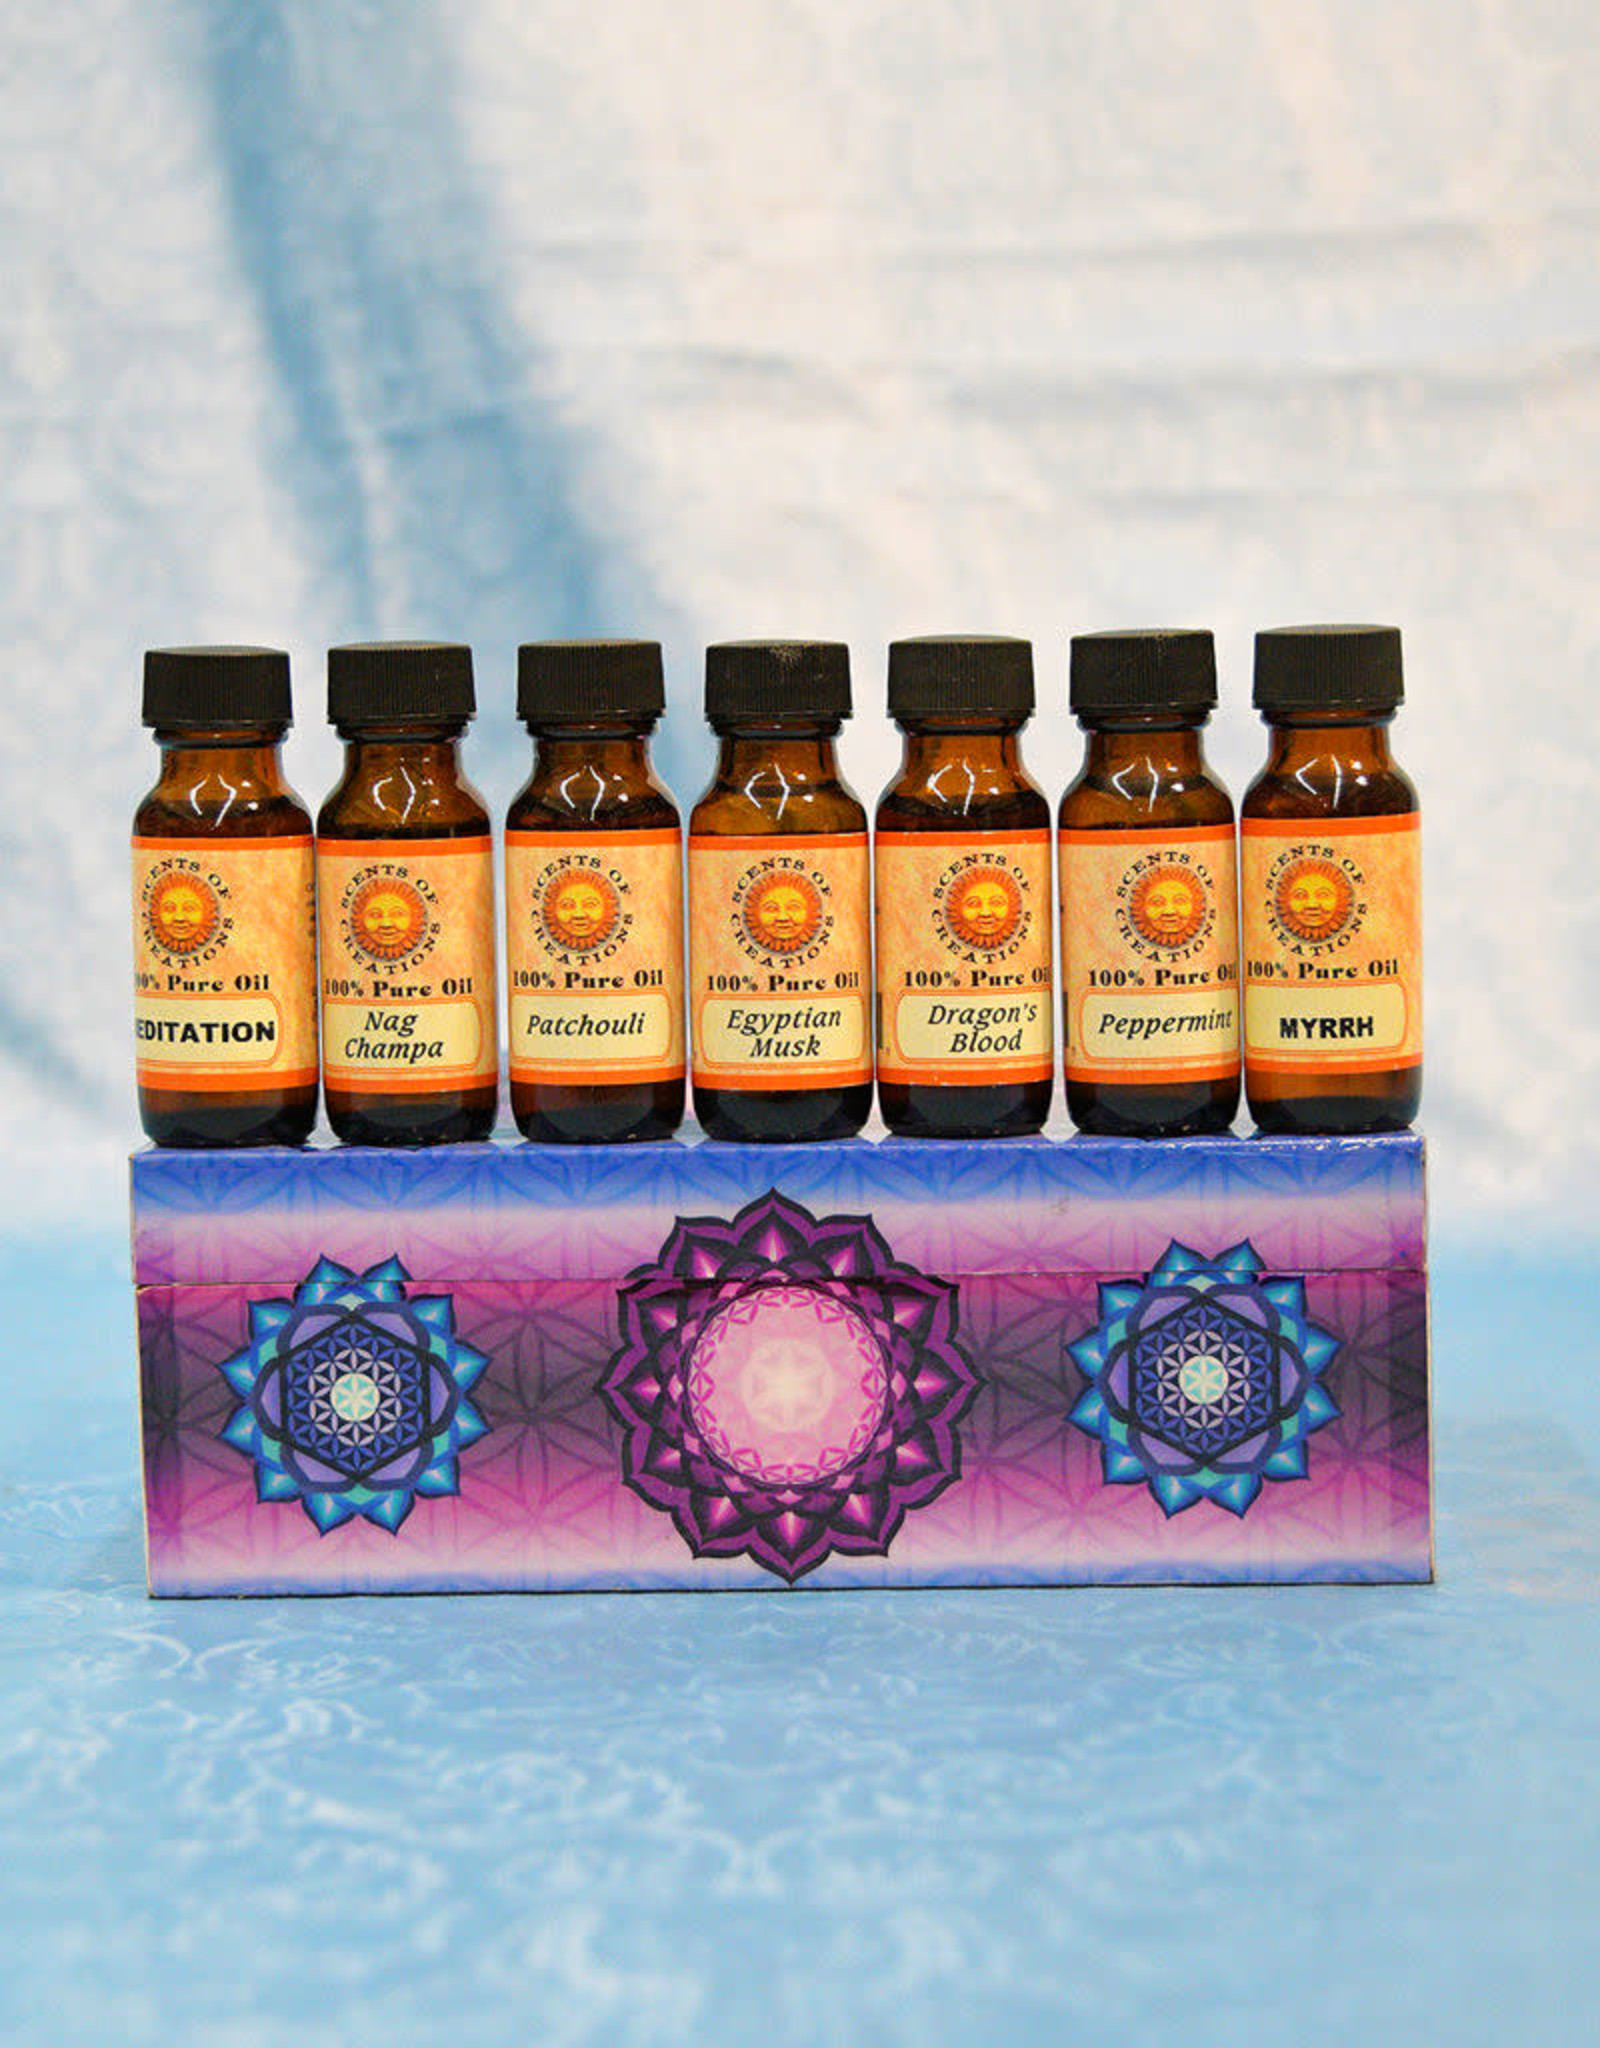 Scents of Creations Scents of Creations Fragrance Oil - Meow